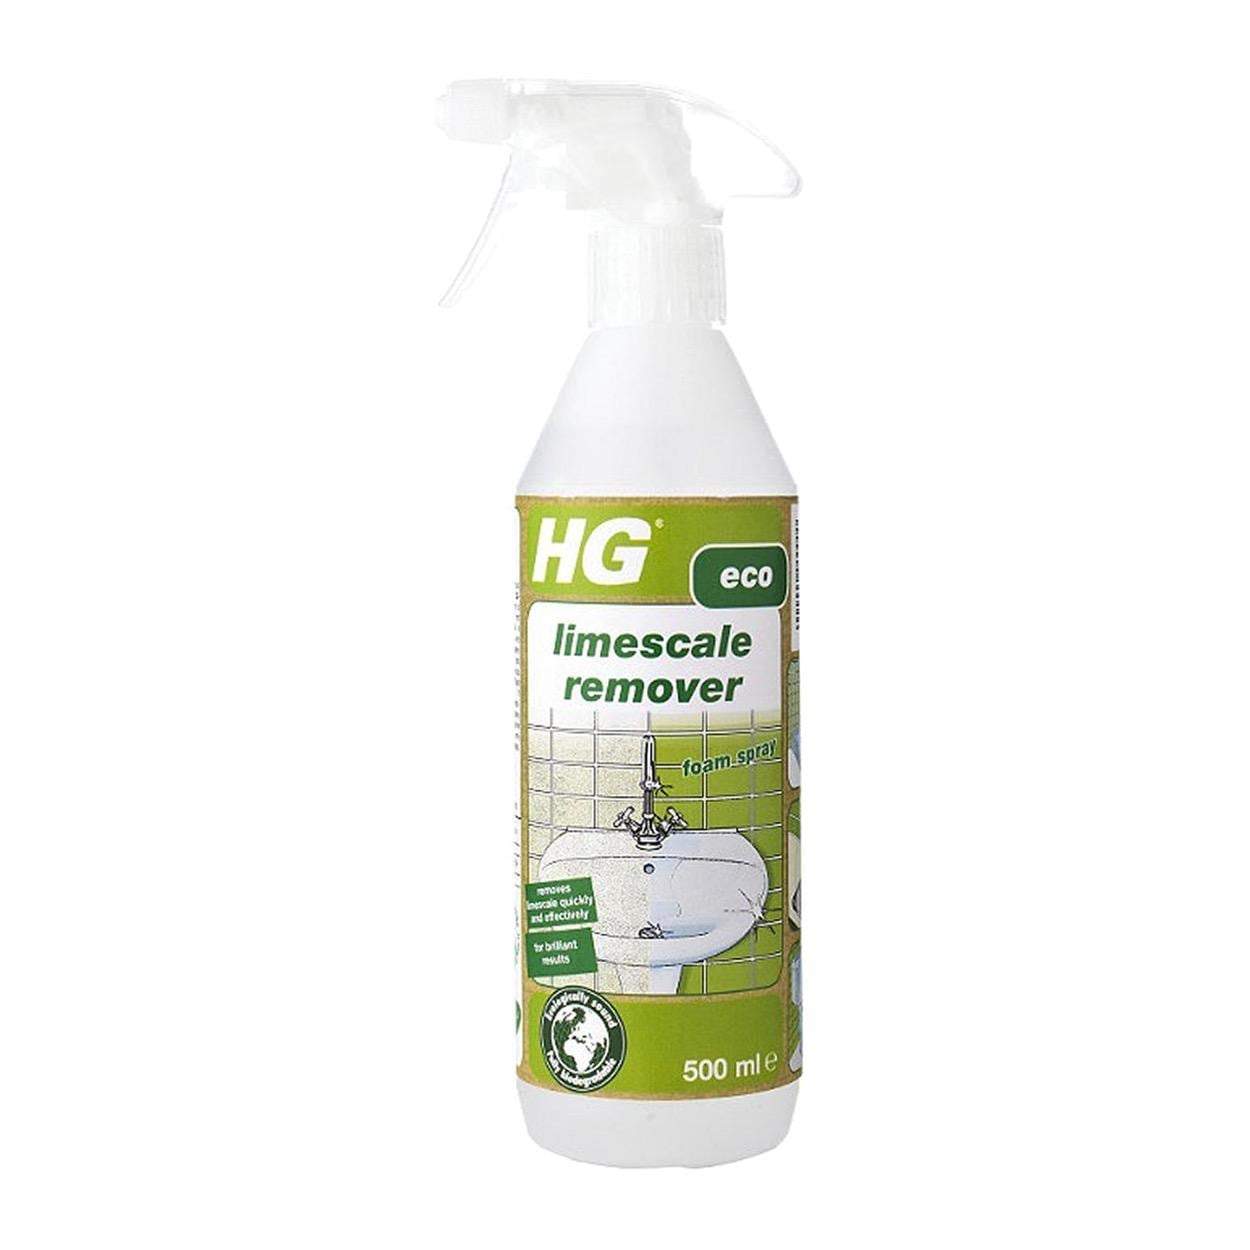 Photo of HG Eco Limescale Remover 500ml